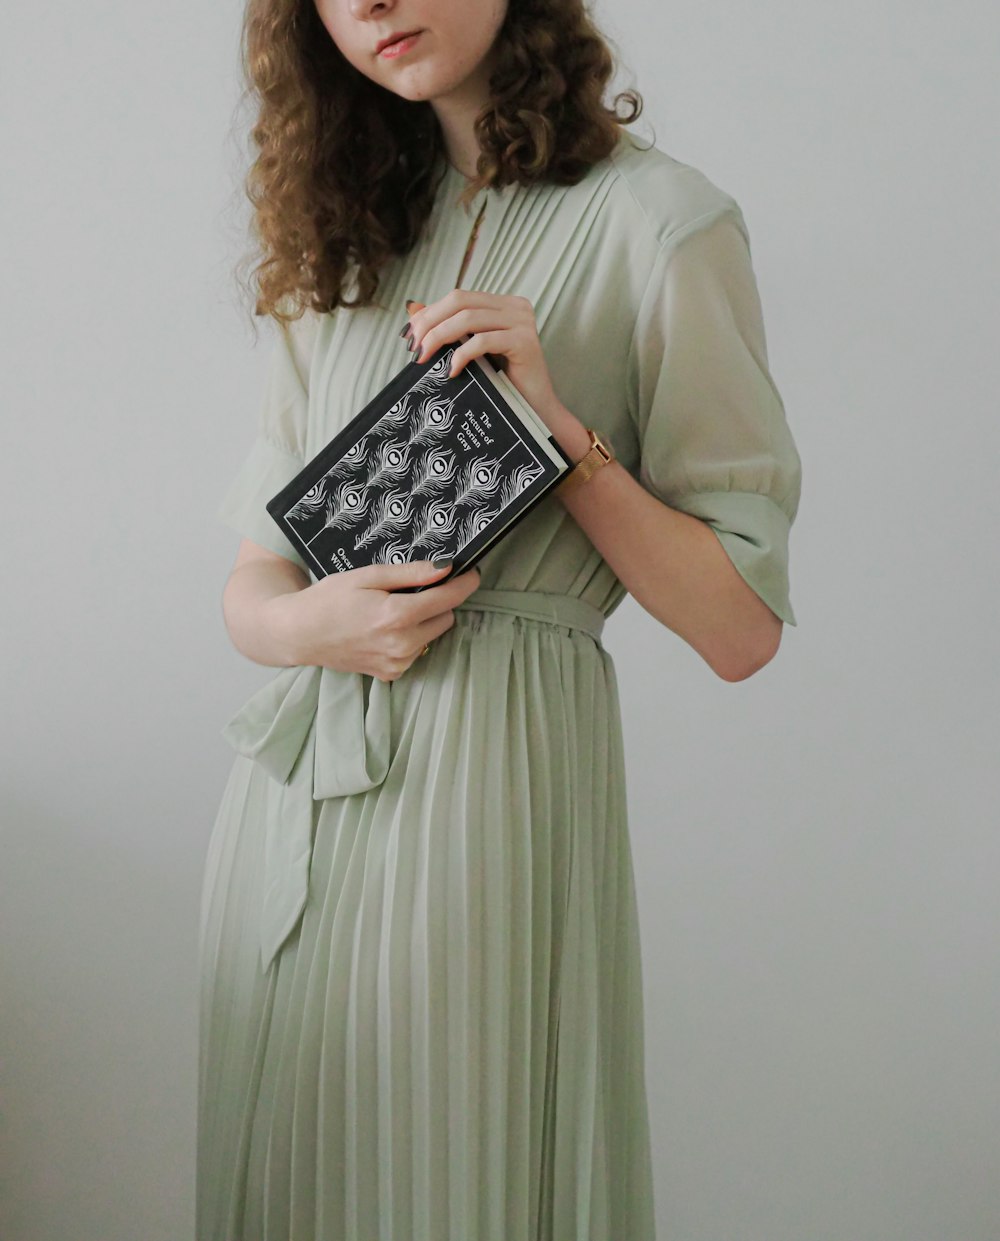 a woman in a green dress holding a book